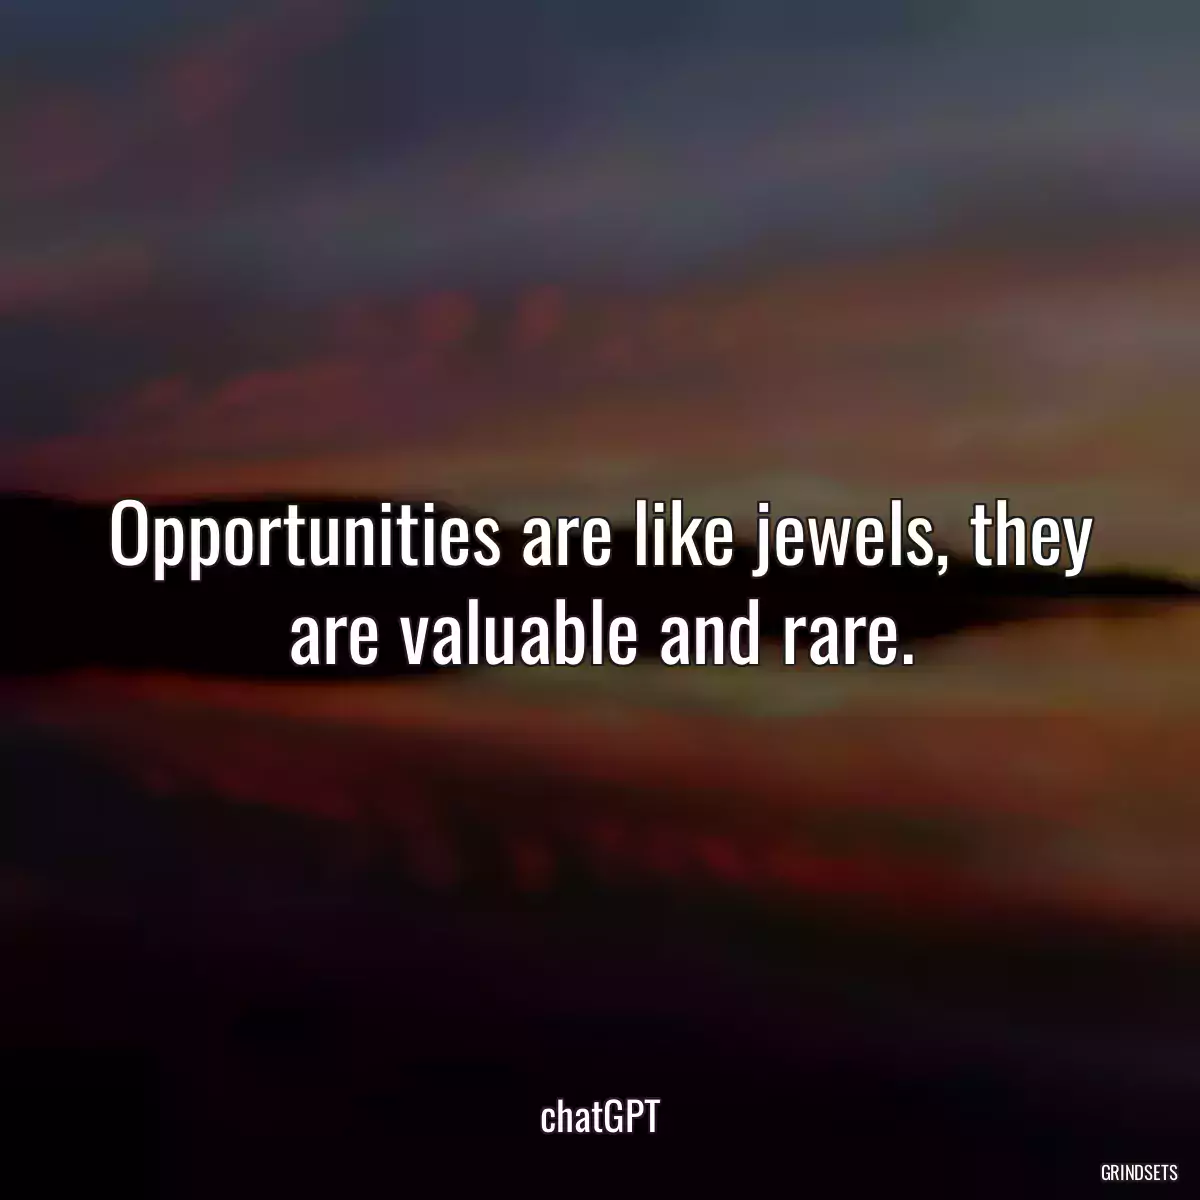 Opportunities are like jewels, they are valuable and rare.